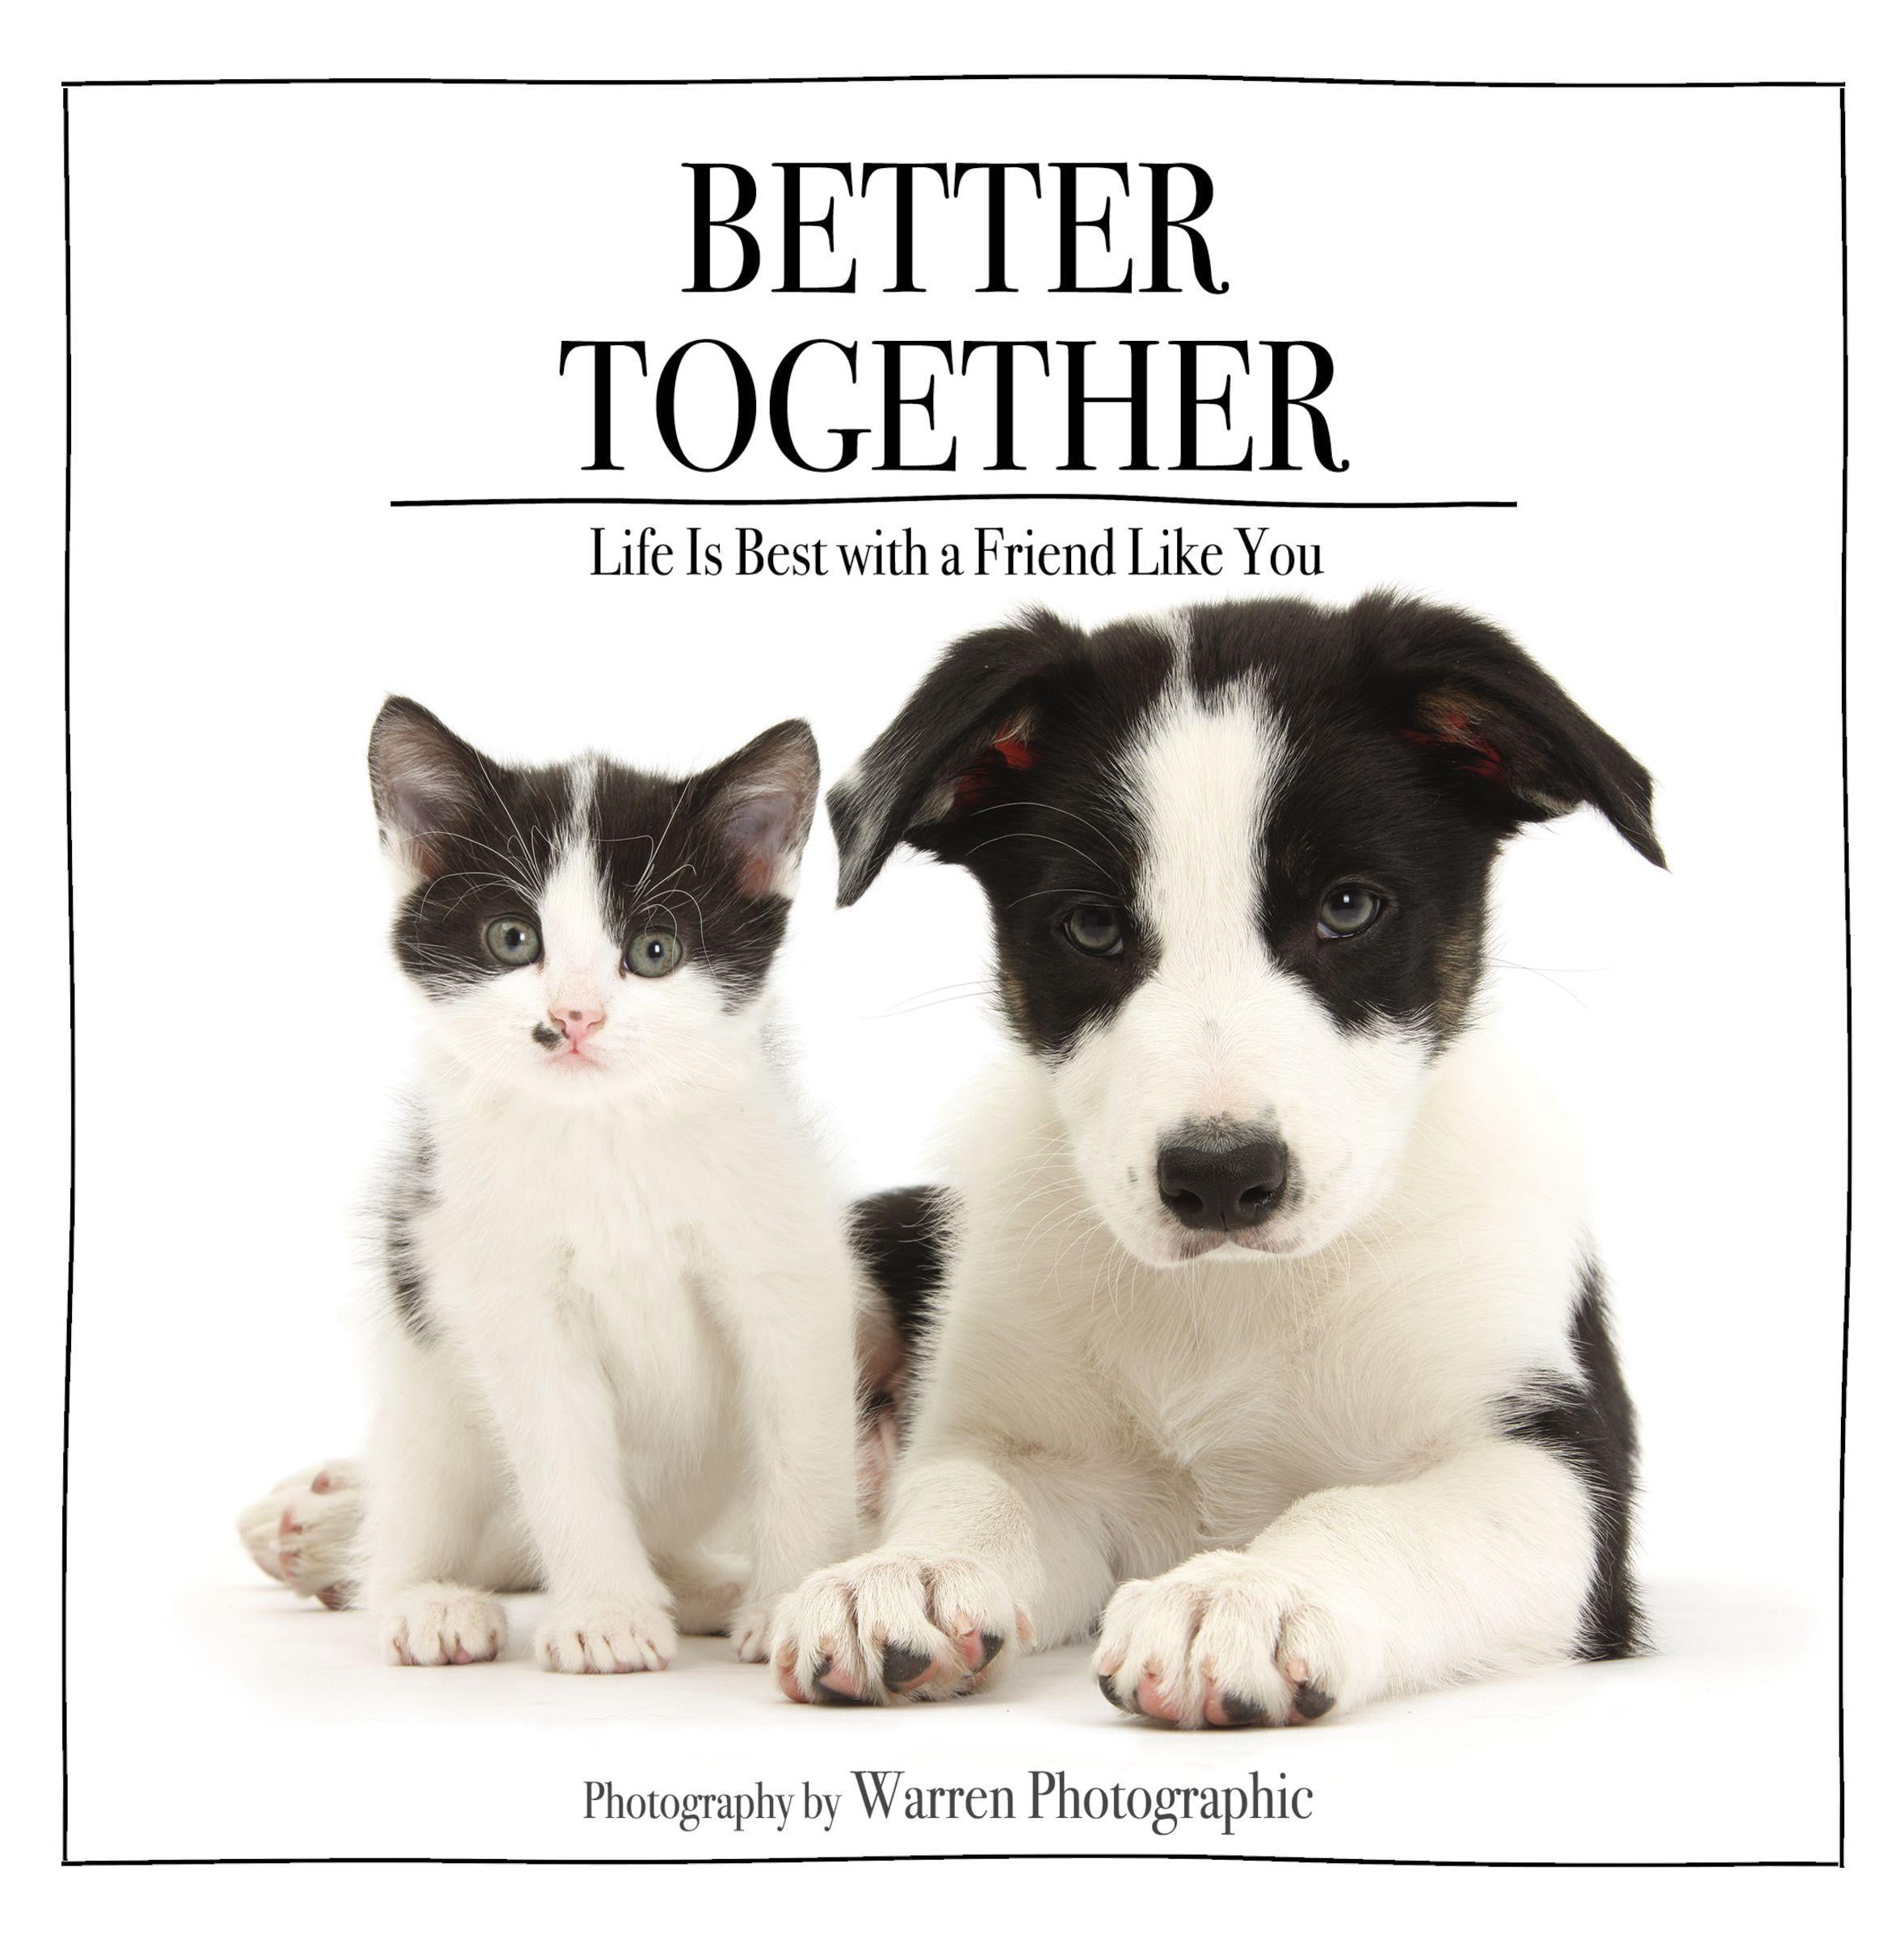 Much better together. A friend like you. Life is better with you. Better together. Better together перевод.